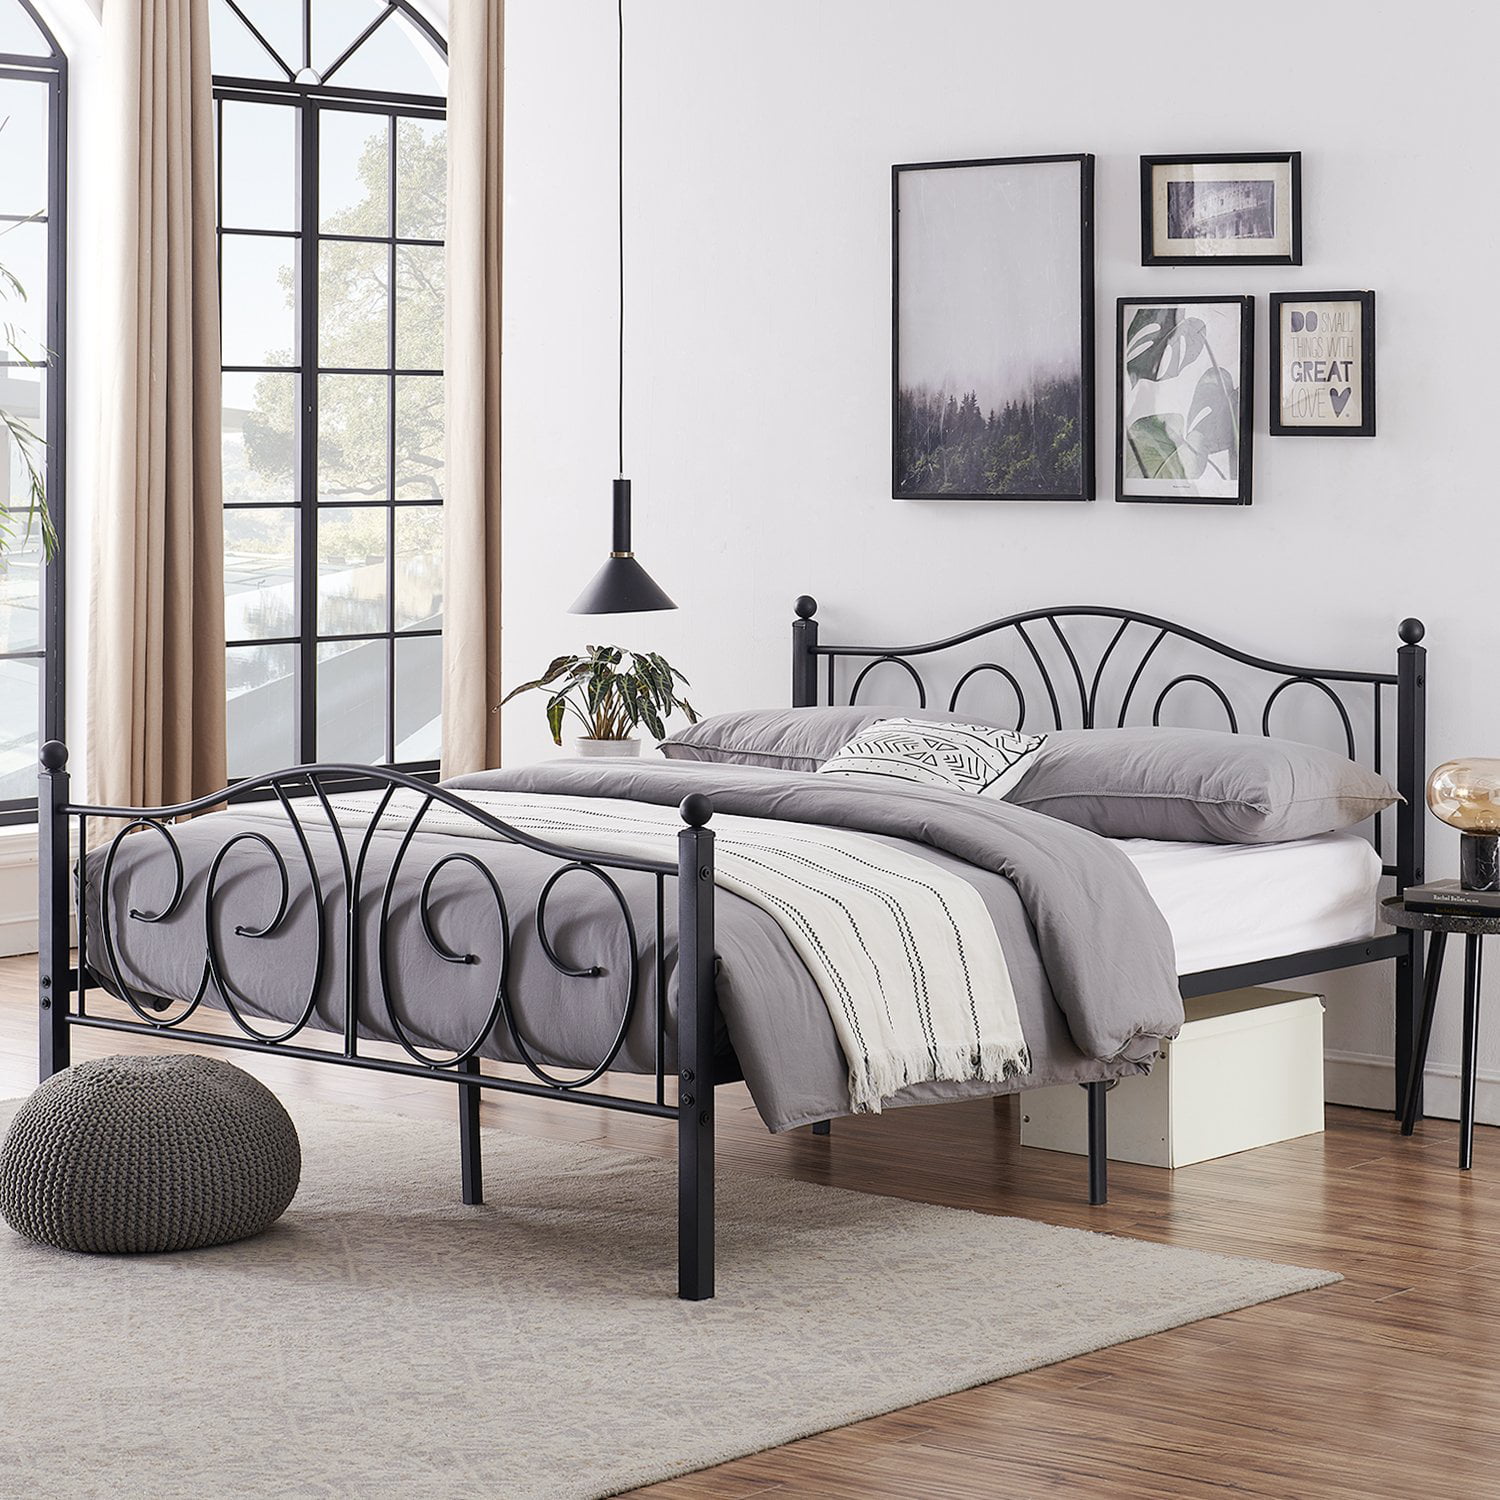 Vecelo Metal Platform Bed Frame With, How To Attach Headboard And Footboard Metal Frame